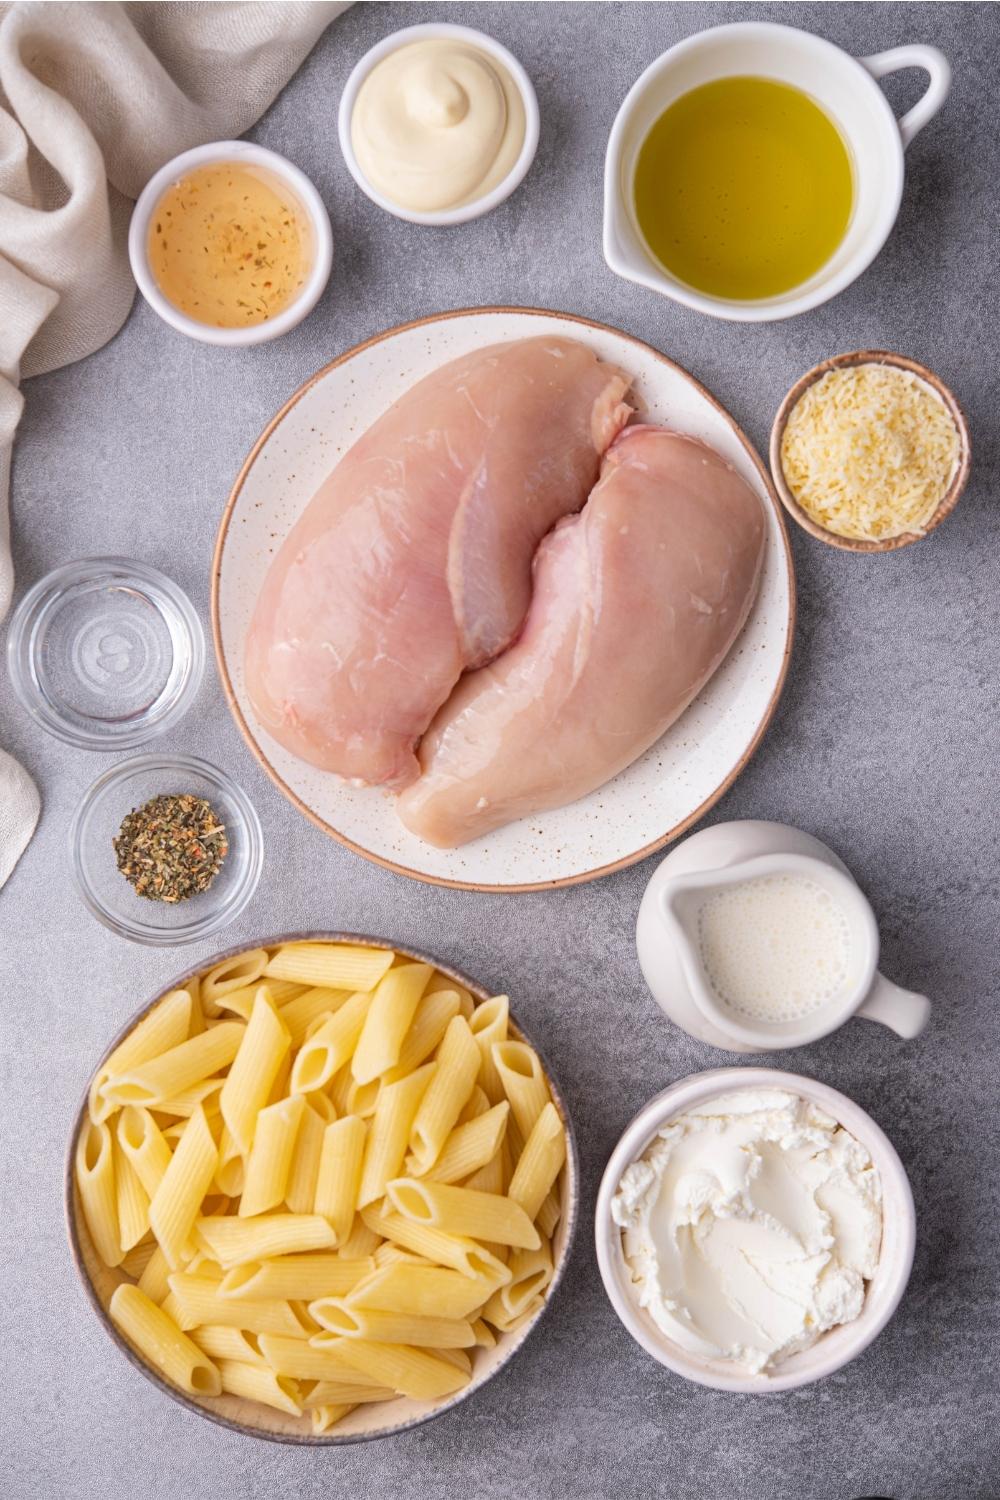 An assortment of ingredients for Olive Garden chicken pasta including raw chicken breasts, cooked pasta, cream cheese, shredded cheese, and mayo. Everything is on a grey counter and there is a partial view of a white kitchen towel.